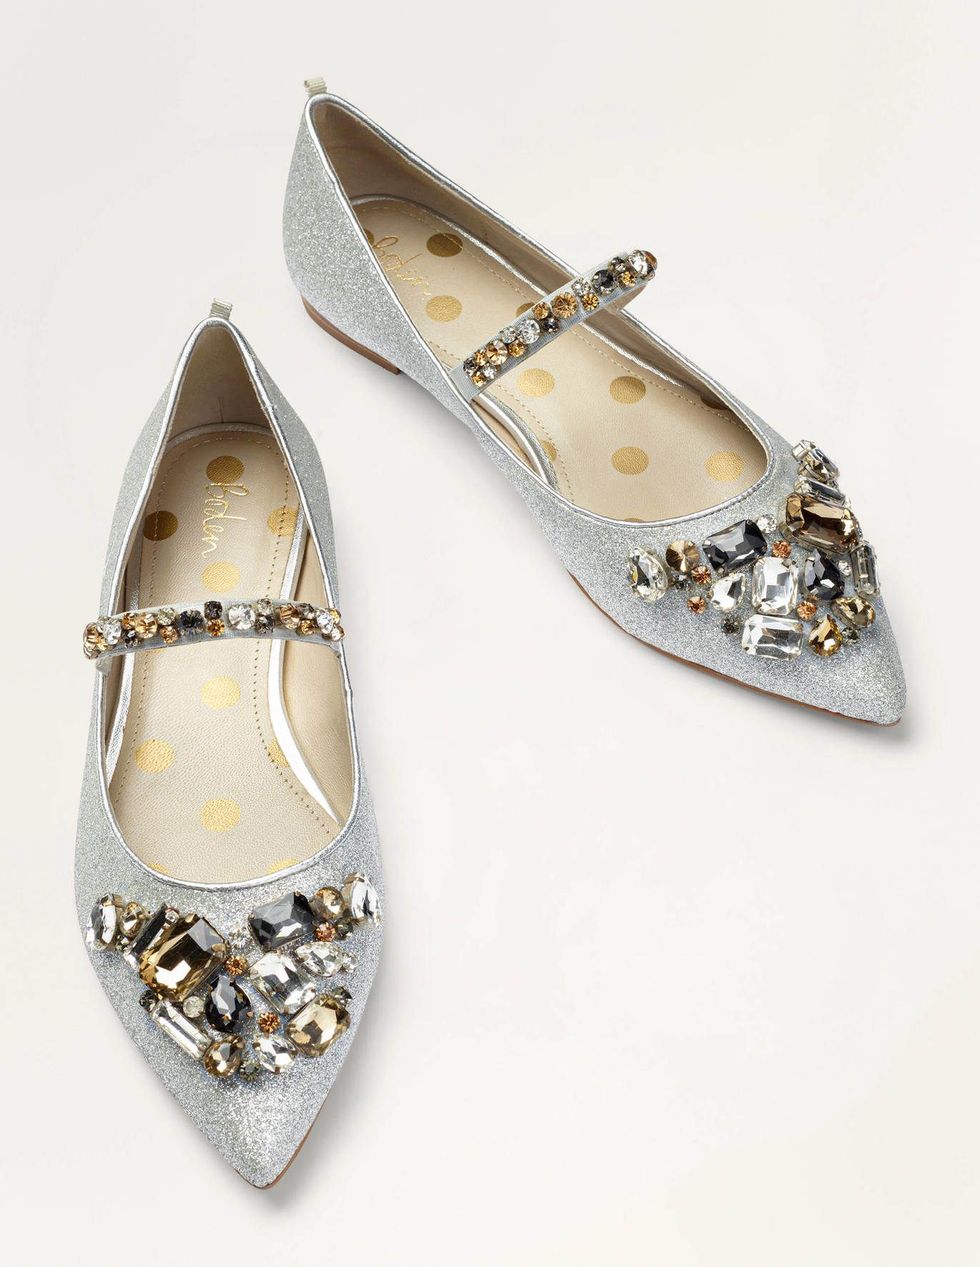 Boden's embellished flats are the ultimate comfy Xmas Day shoe